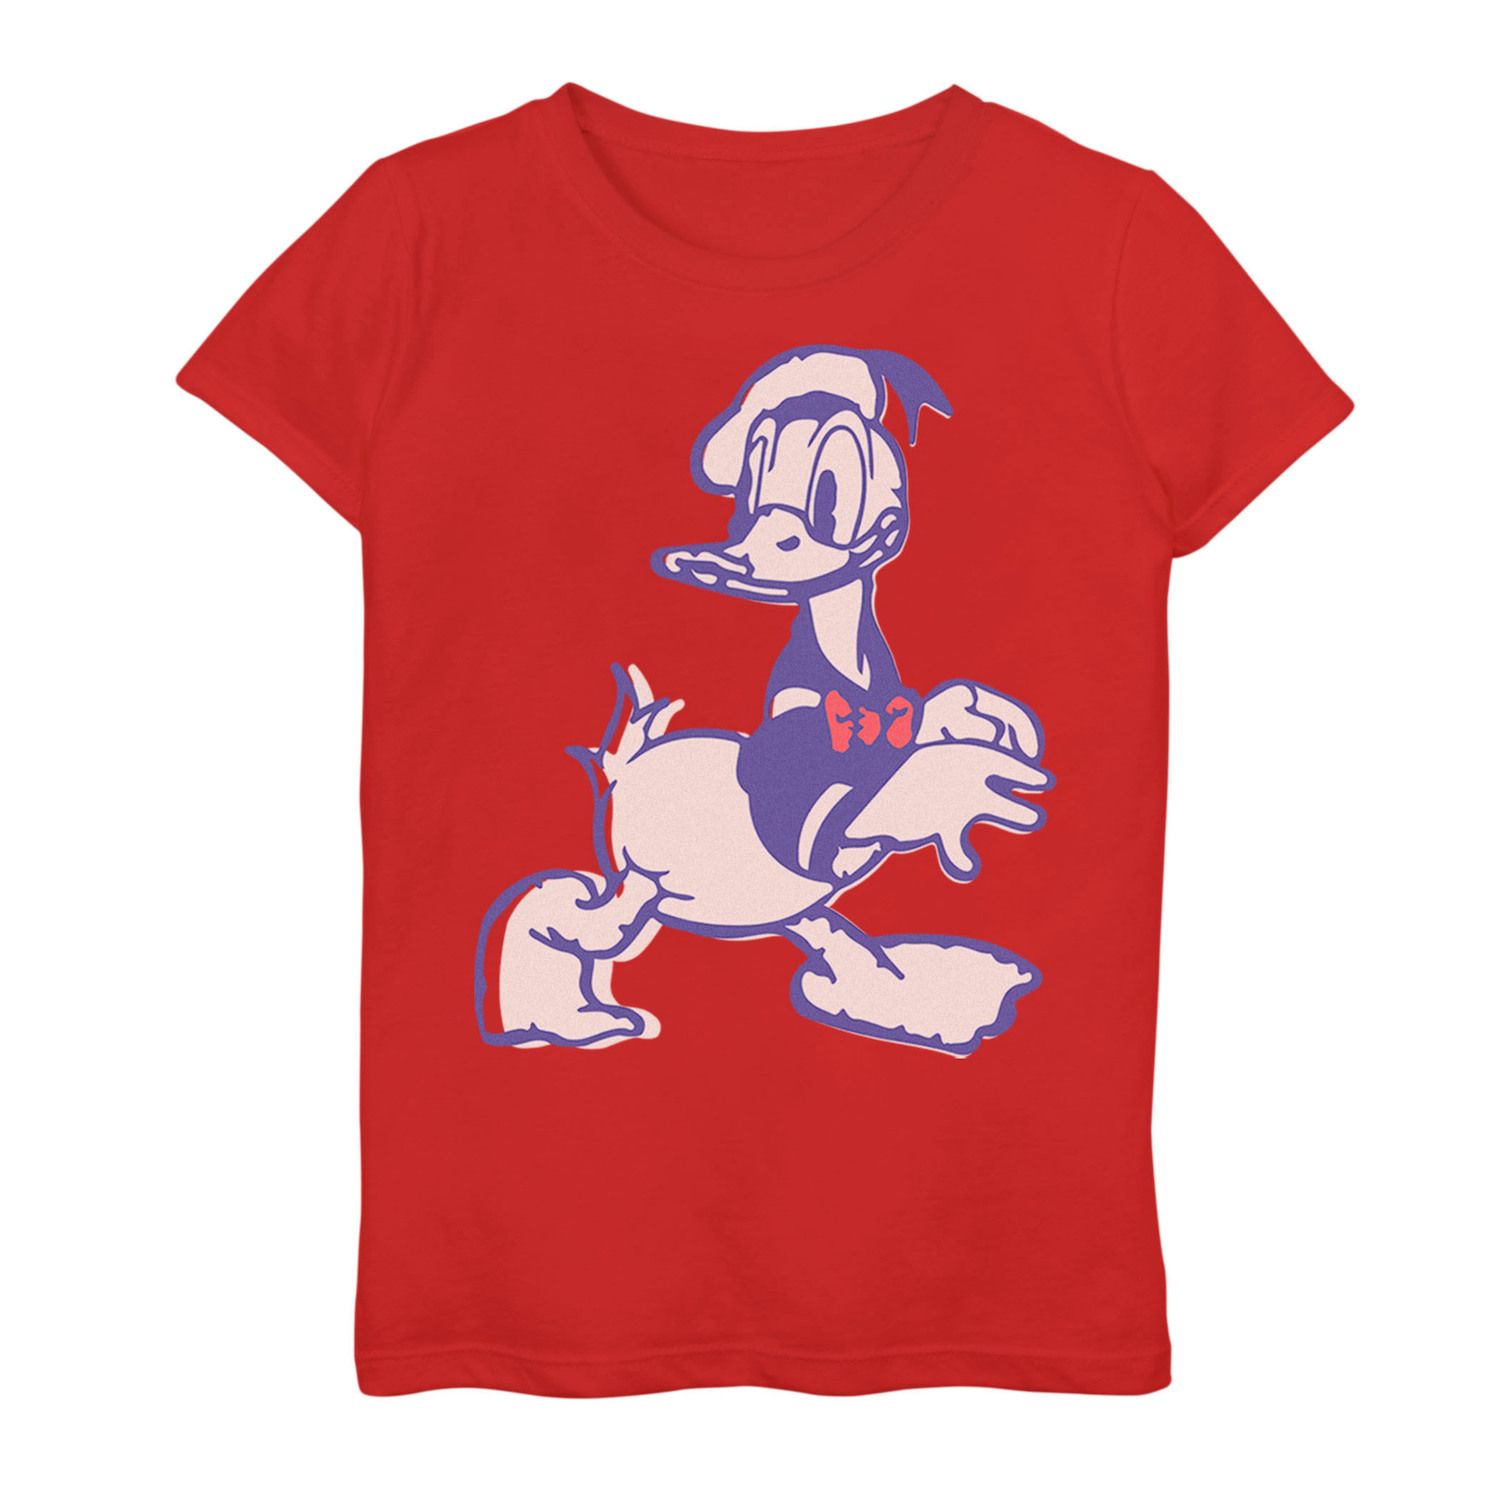 Image for Disney 's Donald Duck Girls 7-16 Vintage Portrait Sketch Graphic Tee at Kohl's.